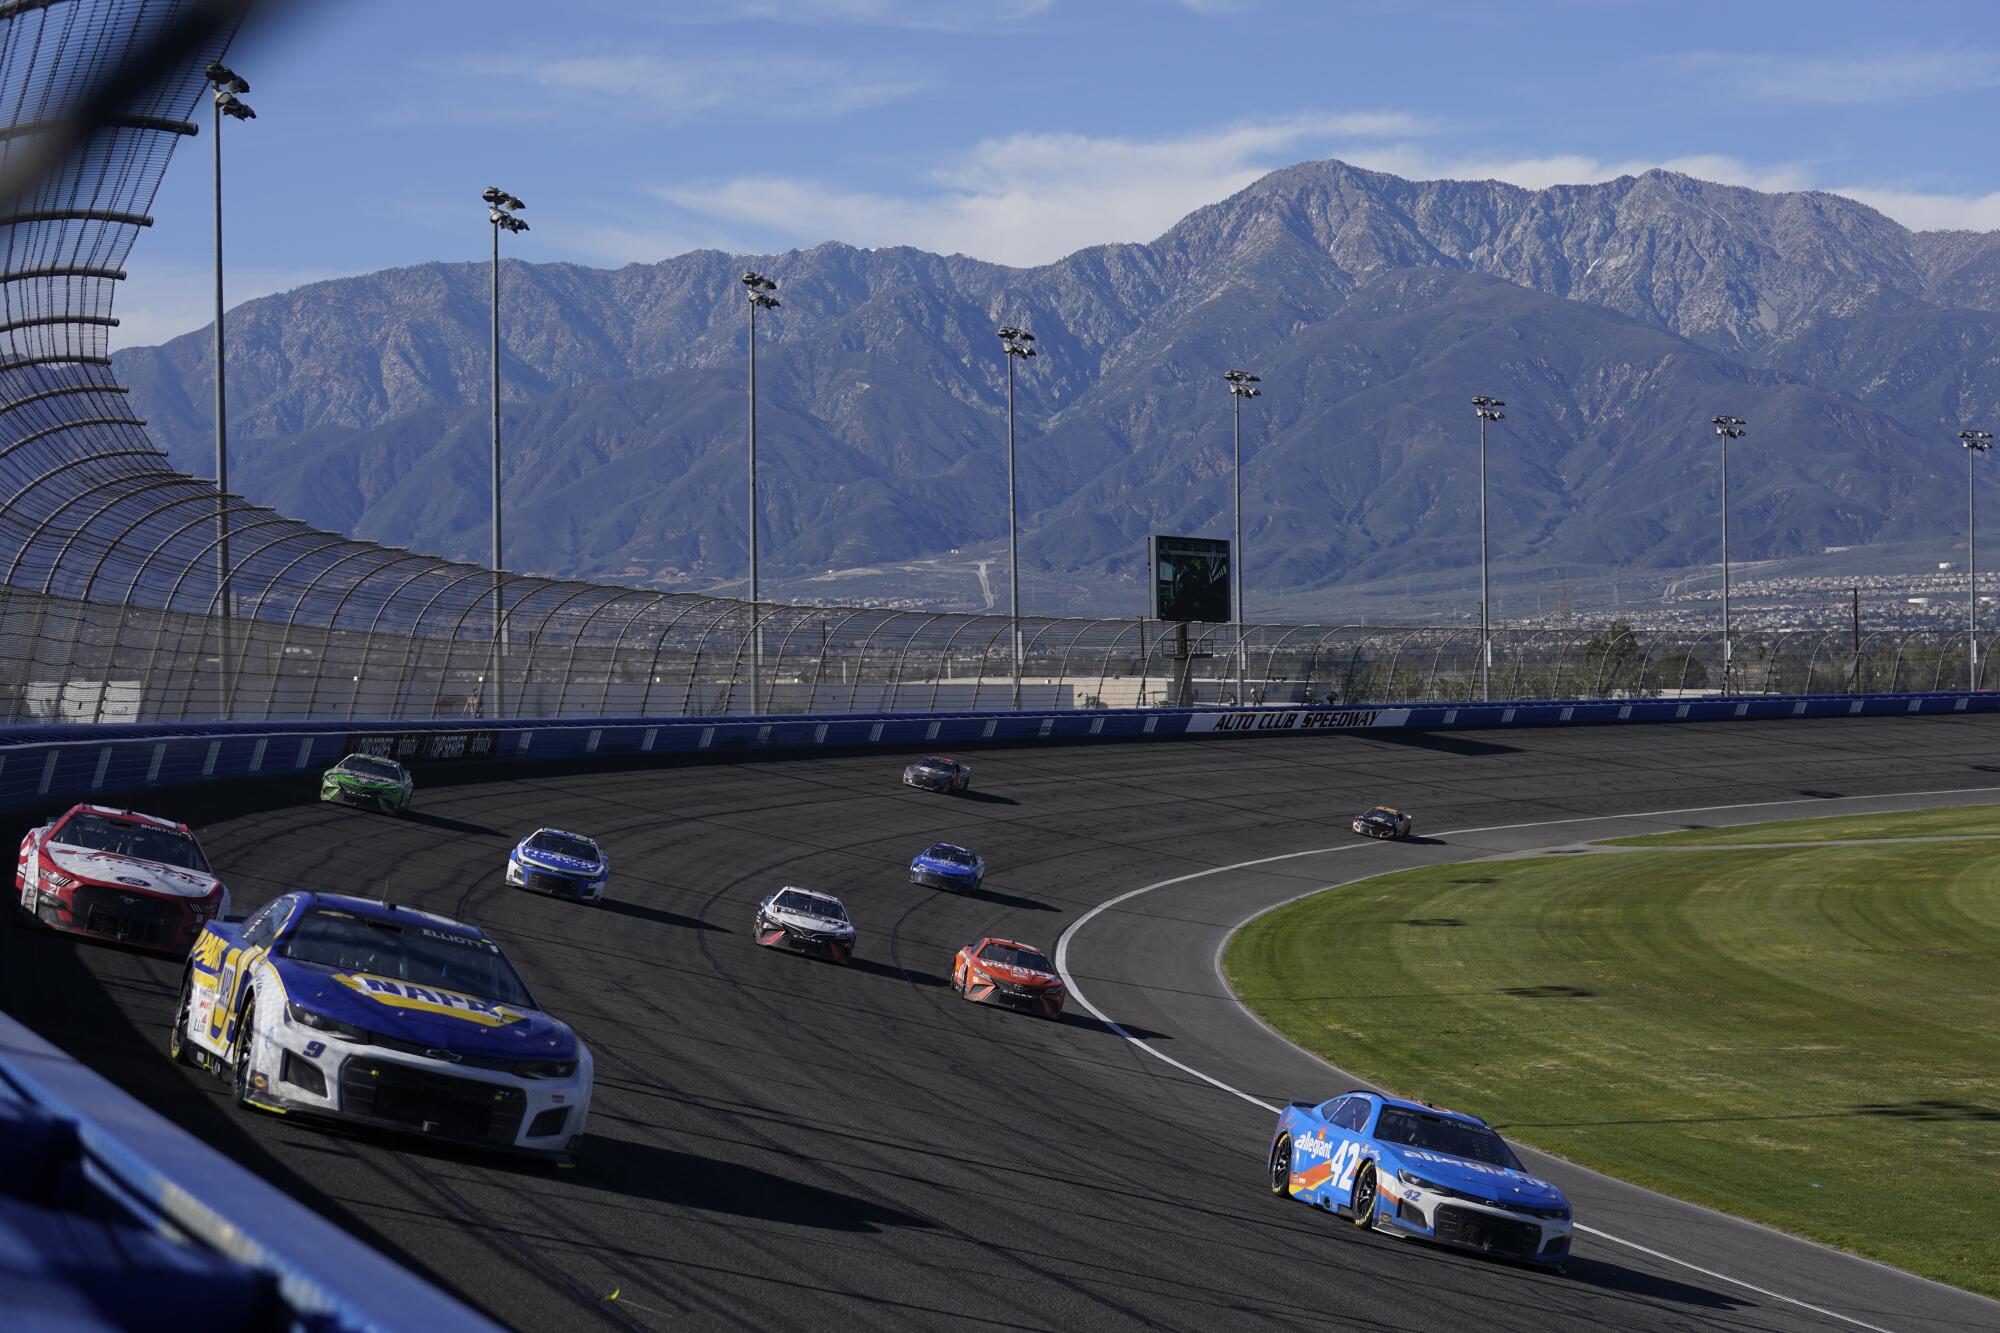 Chase Elliott, top left, leads a pack of driver during the 2022 NASCAR Cup Series race at Auto Club Speedway in Fontana.